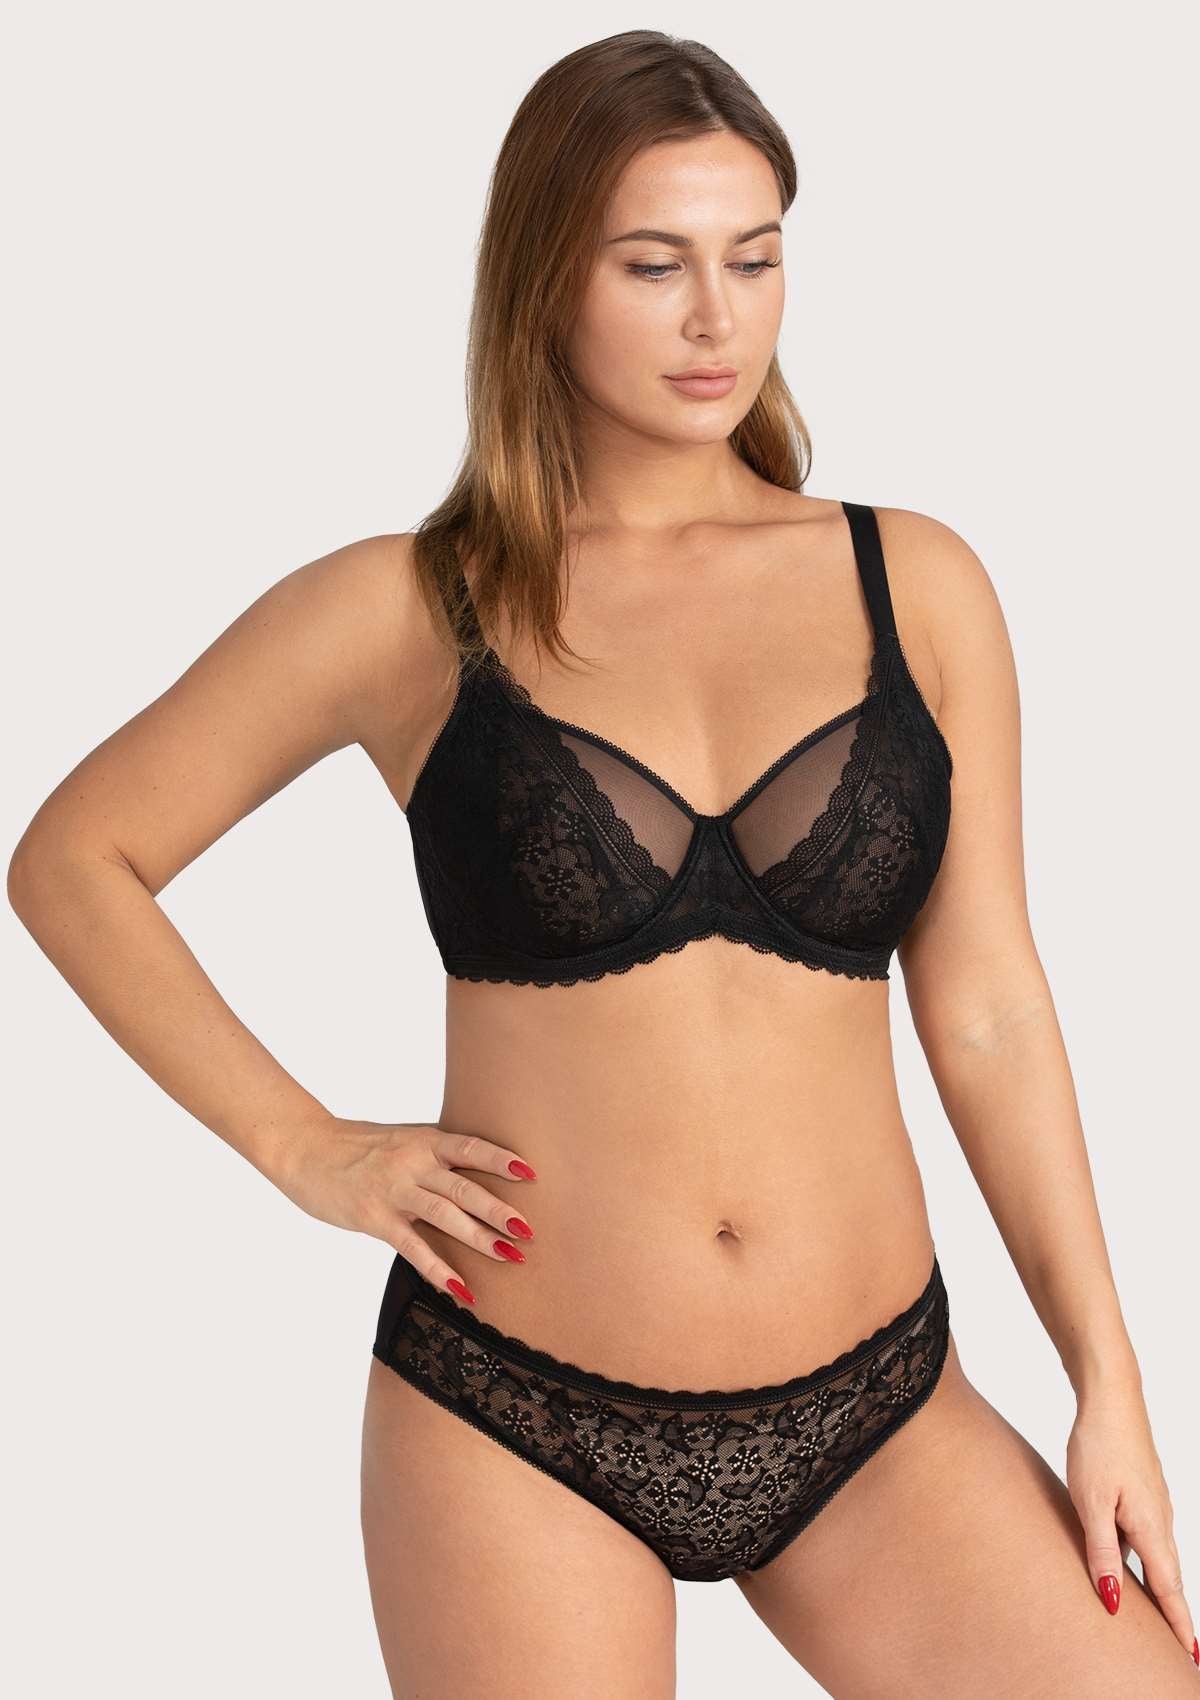 HSIA Anemone Lace Bra And Panties: Back Support Wired Bra - Black / 36 / DD/E